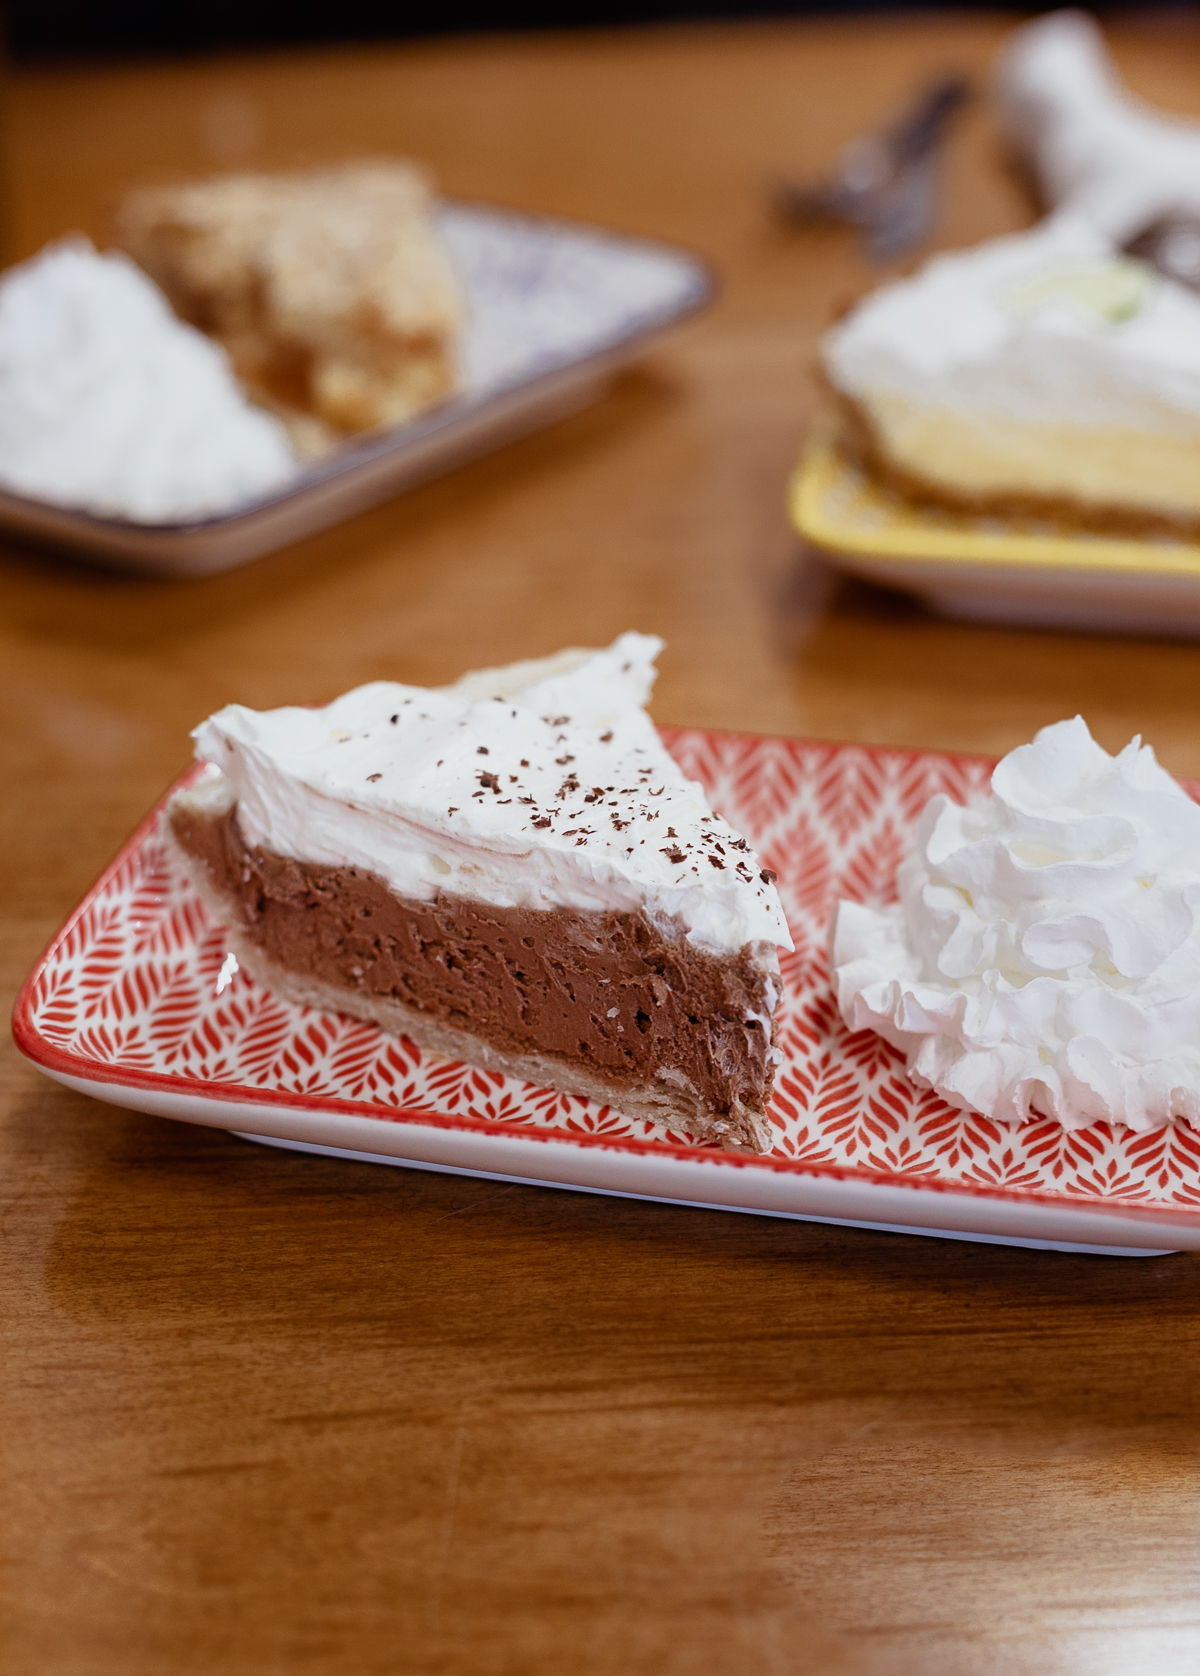 slice of chocolate pie and whipped cream on a red plate with two other slices of pie in the background.